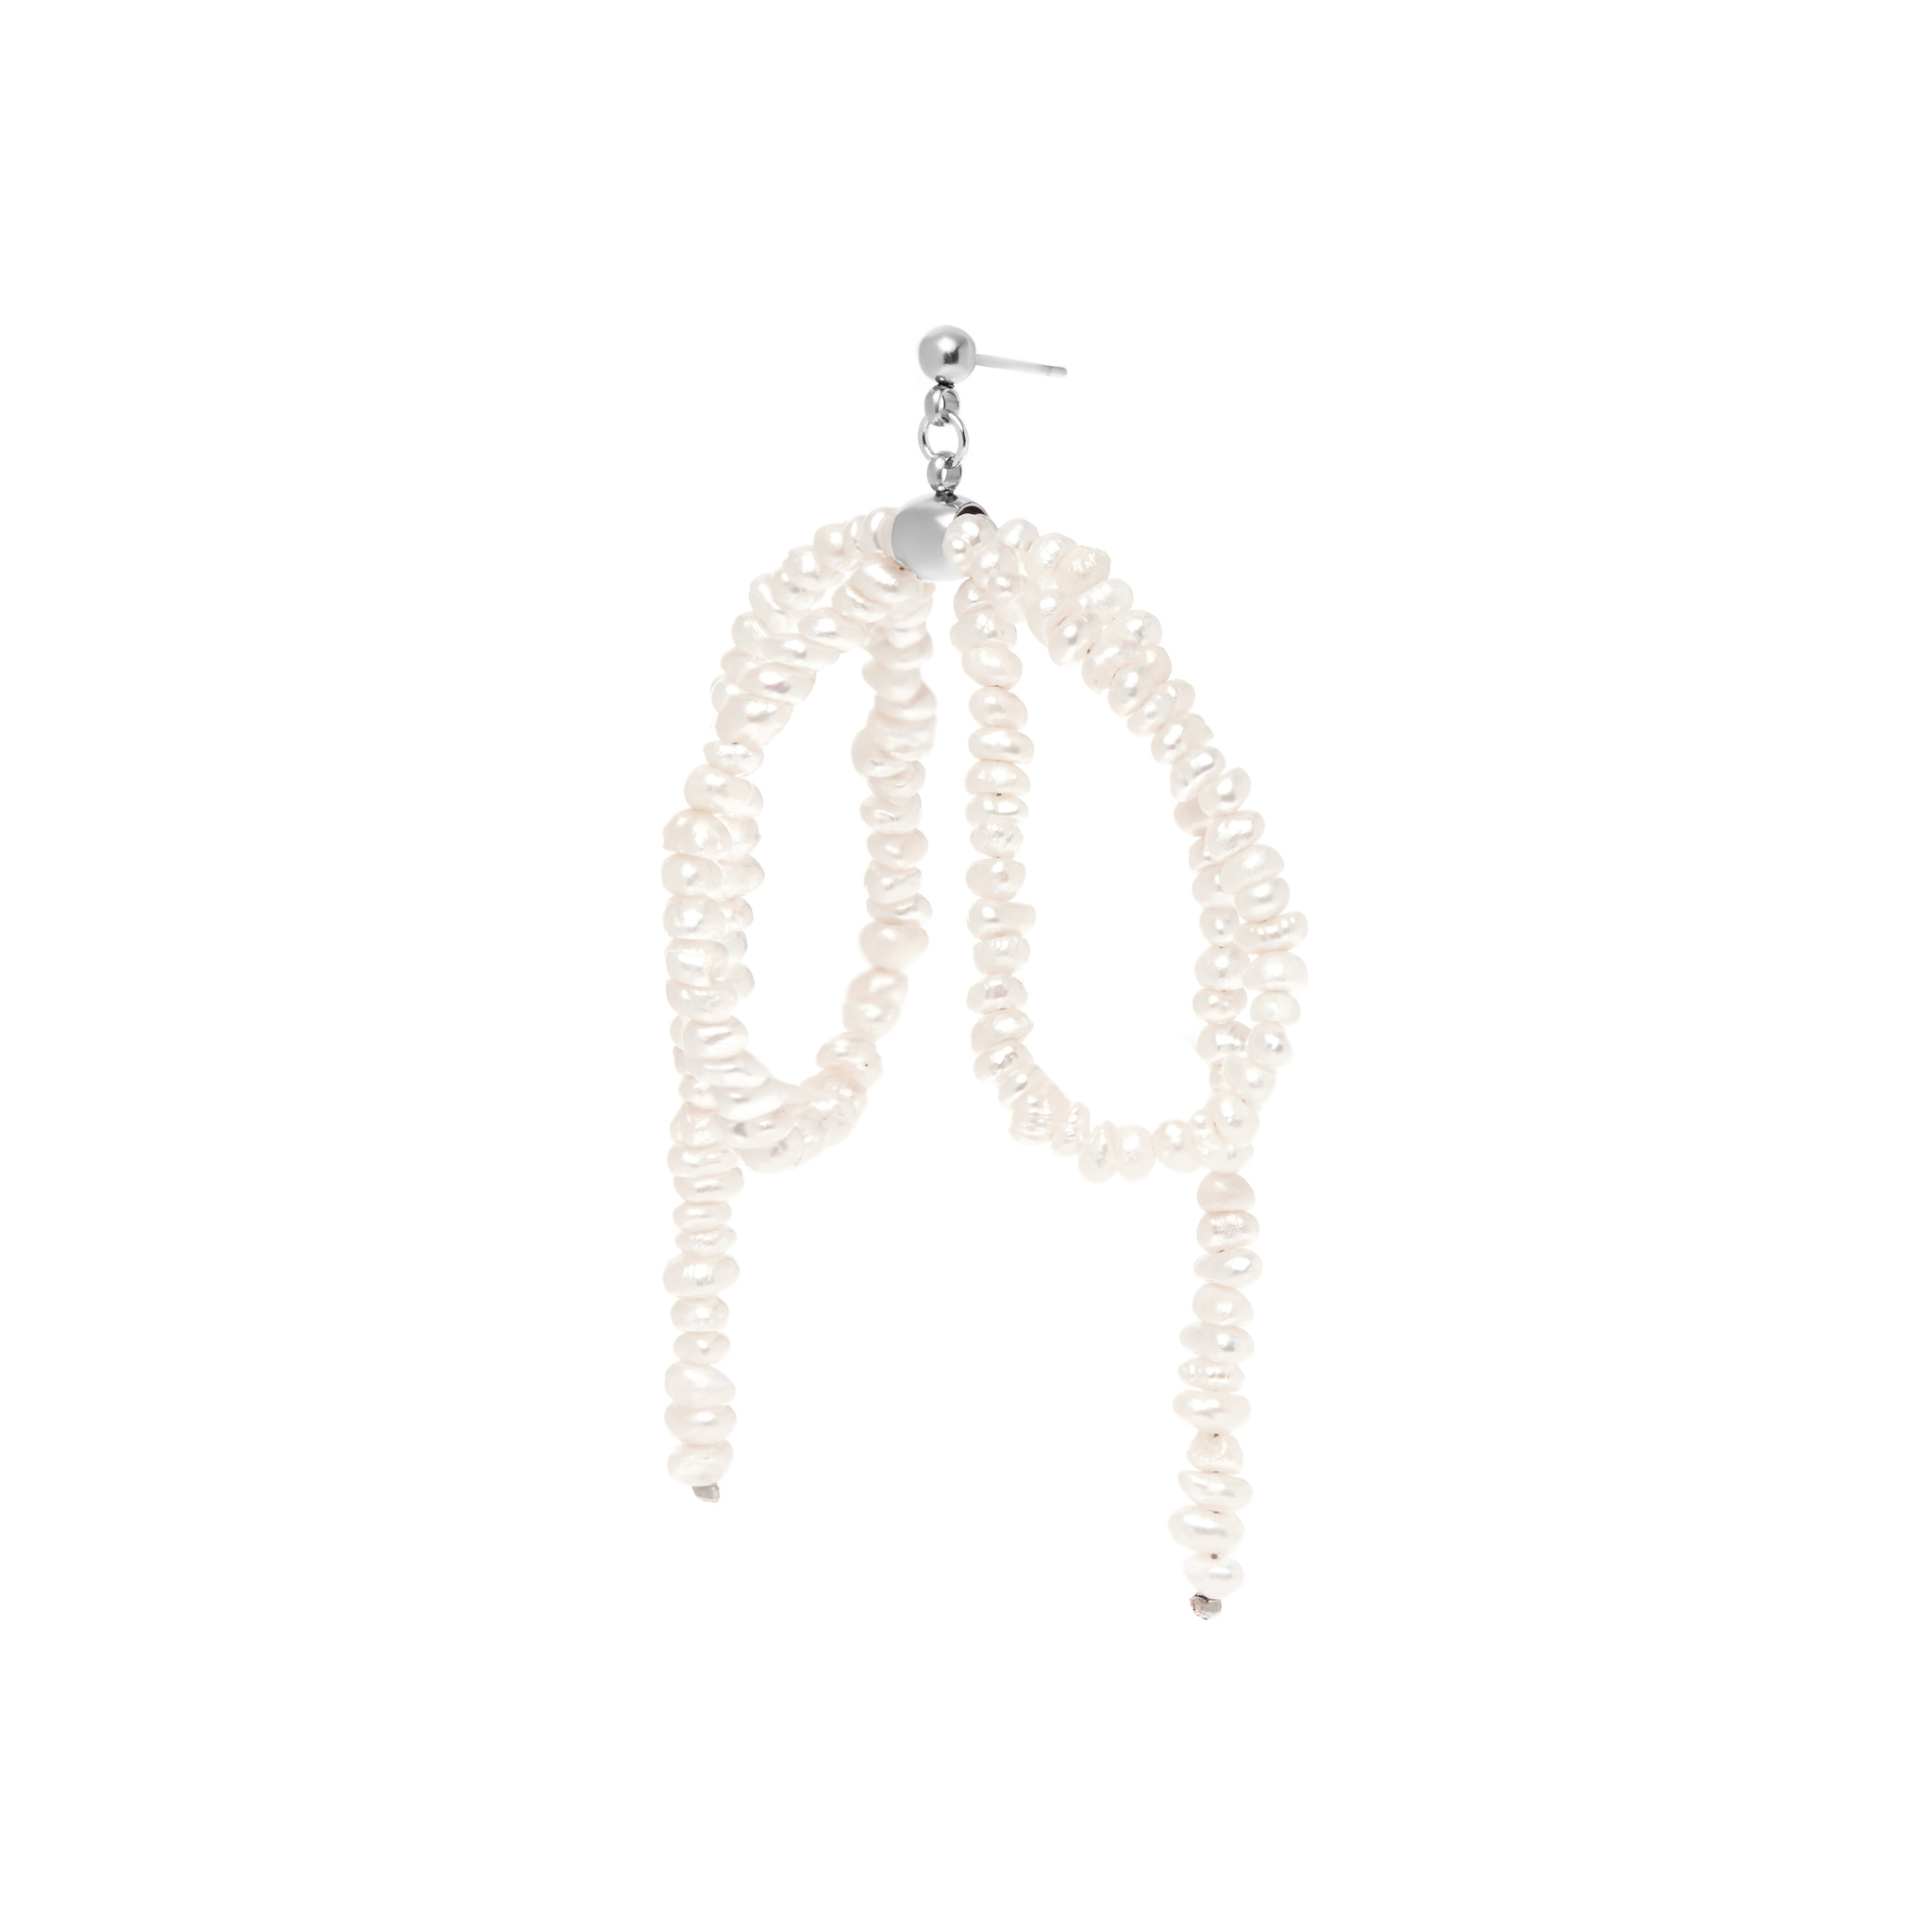 HOLLY JUNE Серьга Pearly Bow Earring holly june серьга the very baroque earring